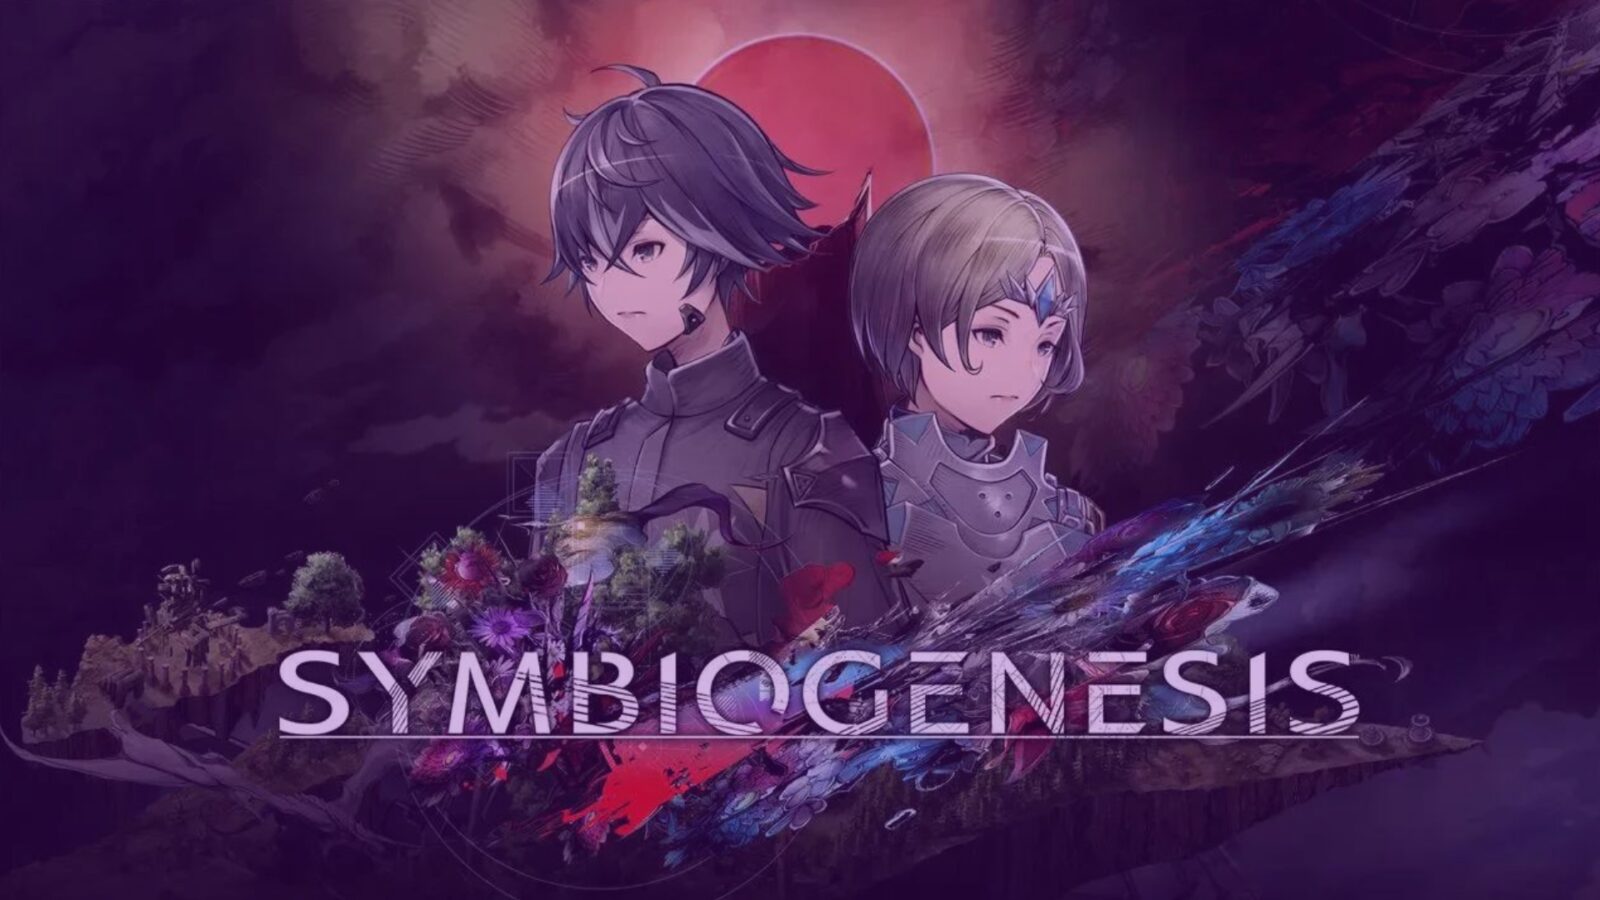 Animoca Brands Japan and Square Enix Team Up for Global Launch of NFT Game SYMBIOGENESIS